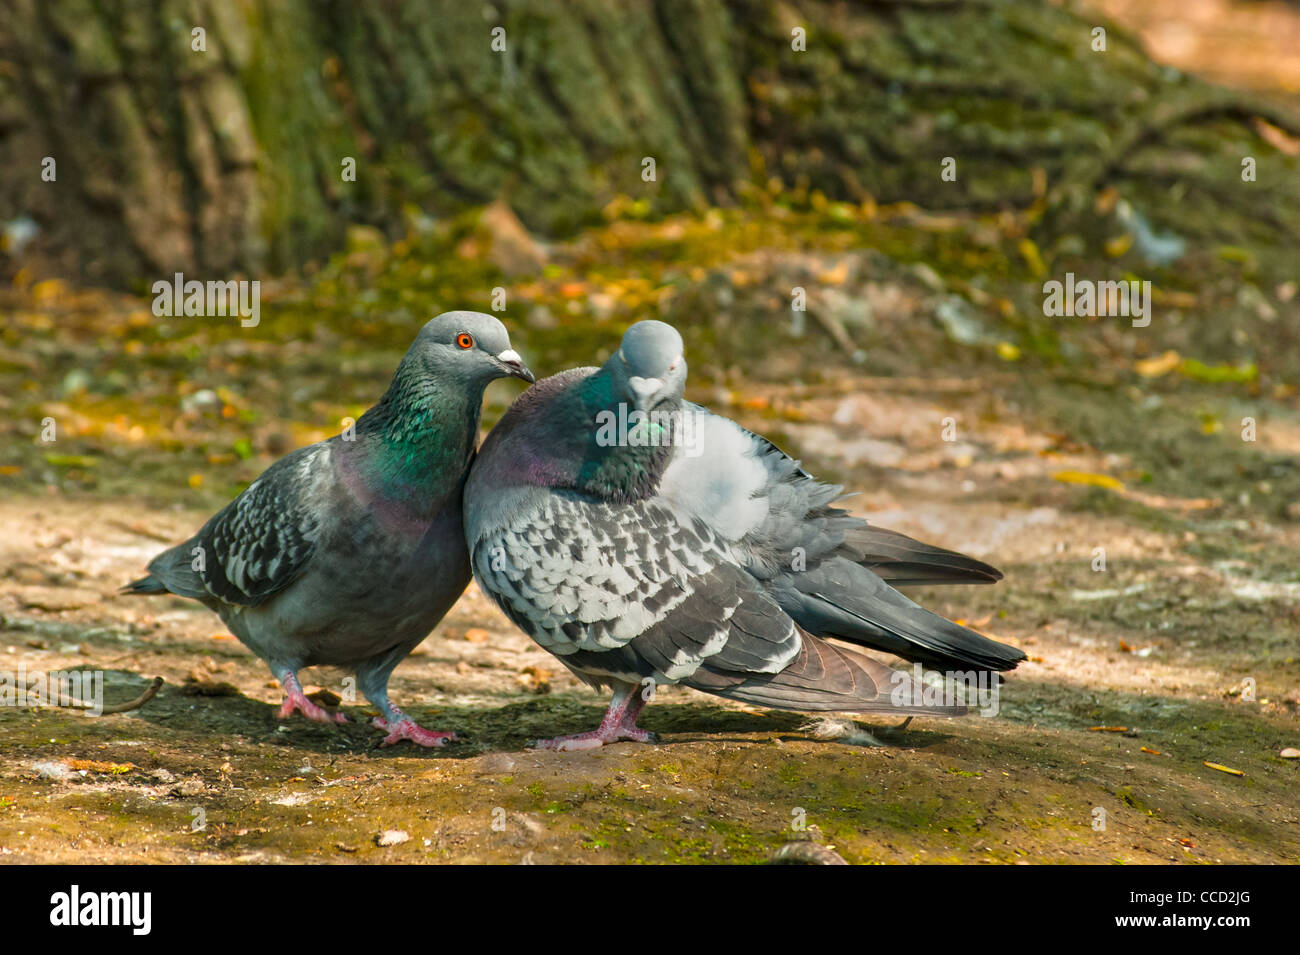 Two pigeons negotiating the pecking order?  Seen at the lakeside in Finsbury Park, North London England UK. Stock Photo